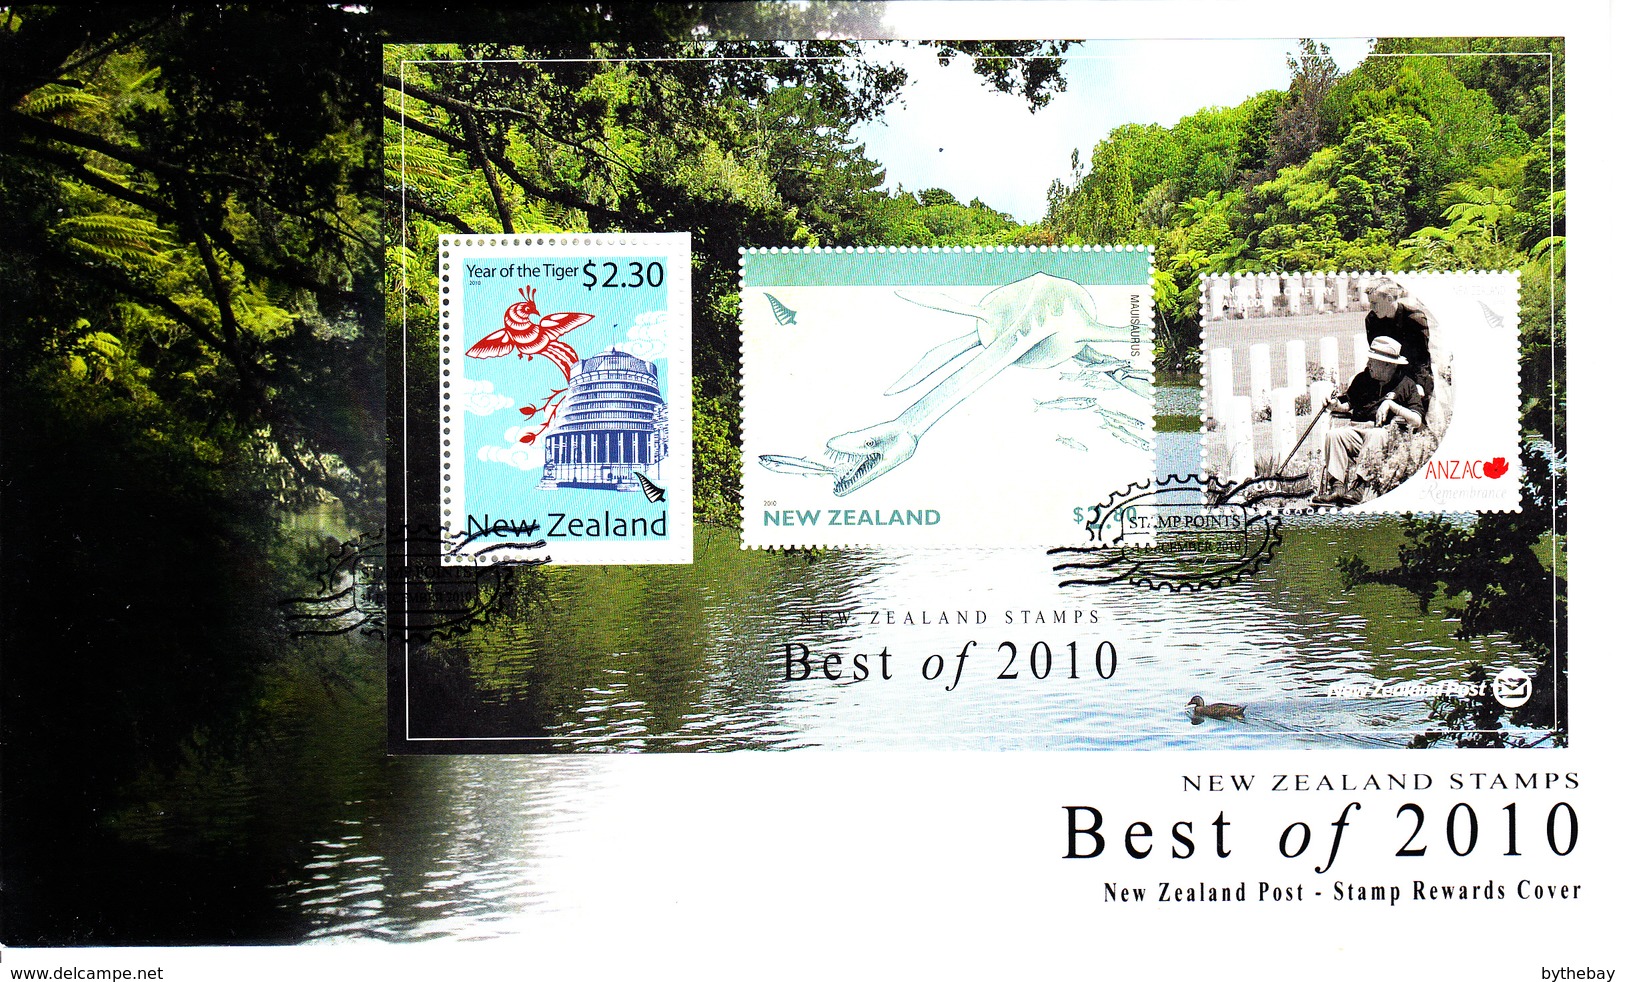 New Zealand Set Of 3 'Best Of 2010' Stamp Rewards Miniature Sheet On Covers Dated December 31, 2010 - Covers & Documents